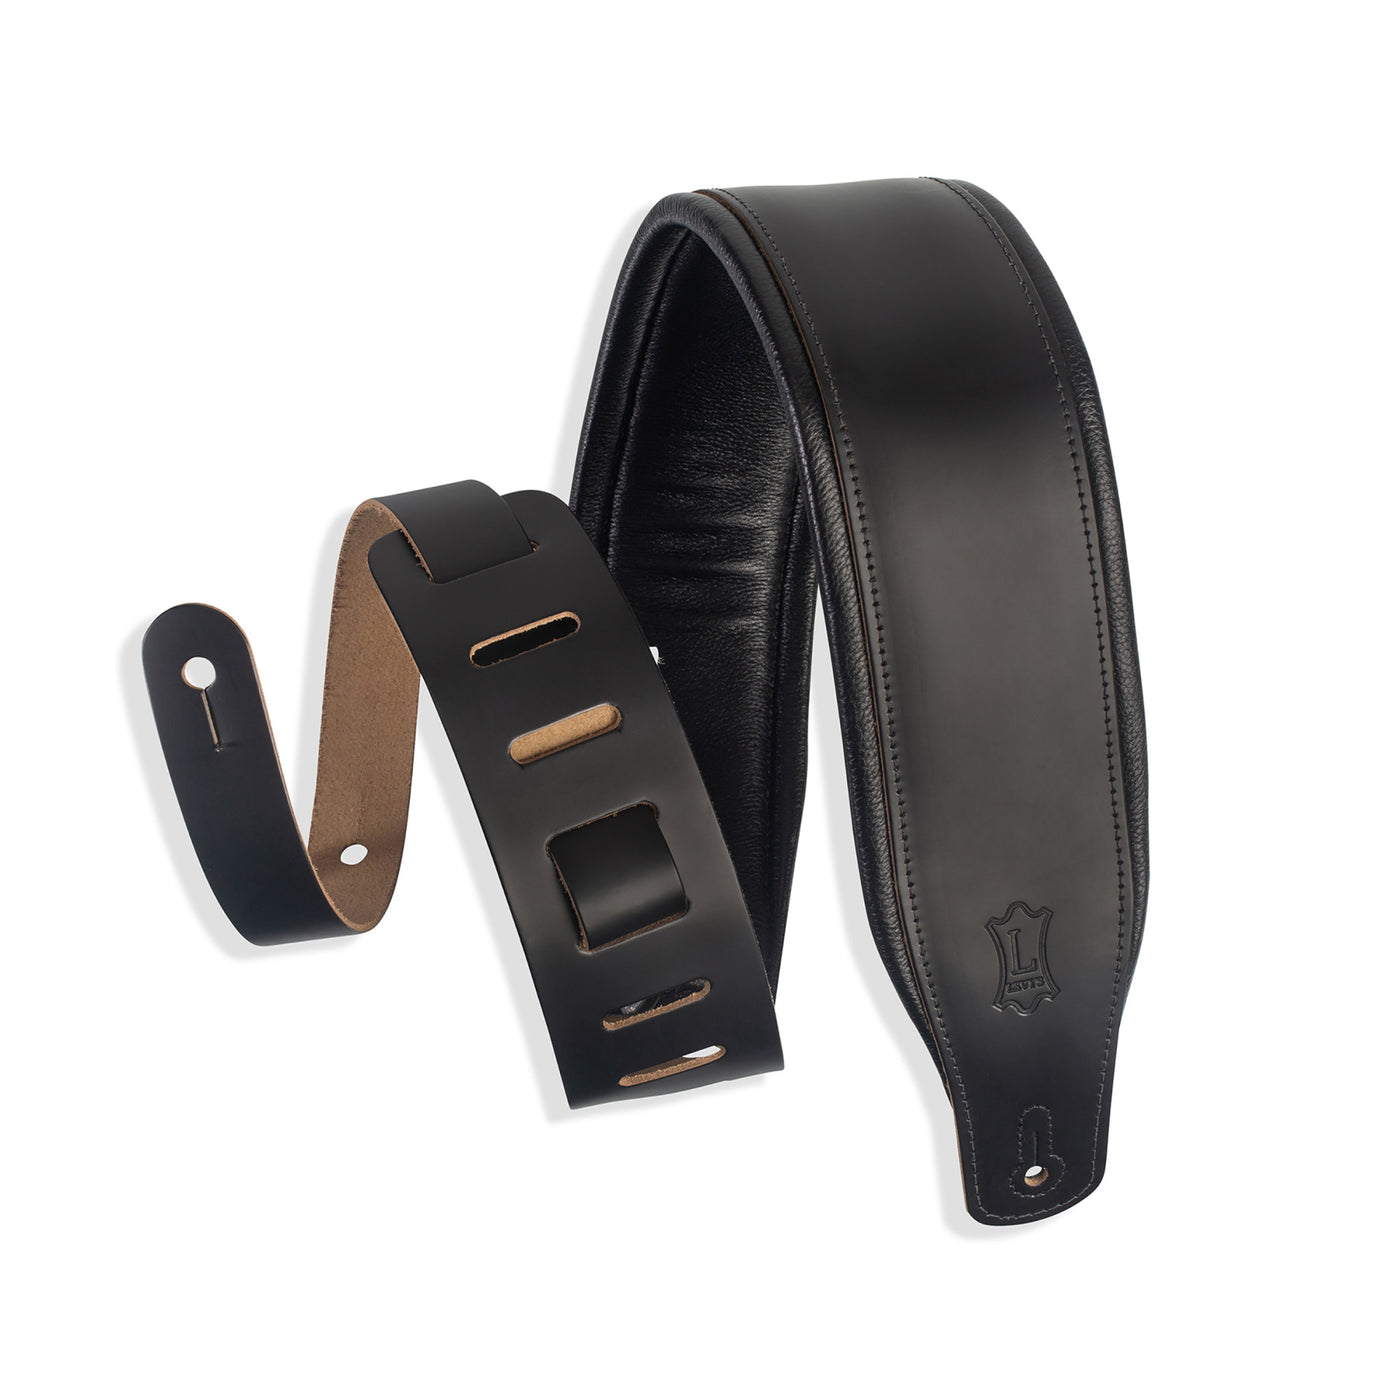 Levy's 3" Padded Leather Strap in Black with Black Backing